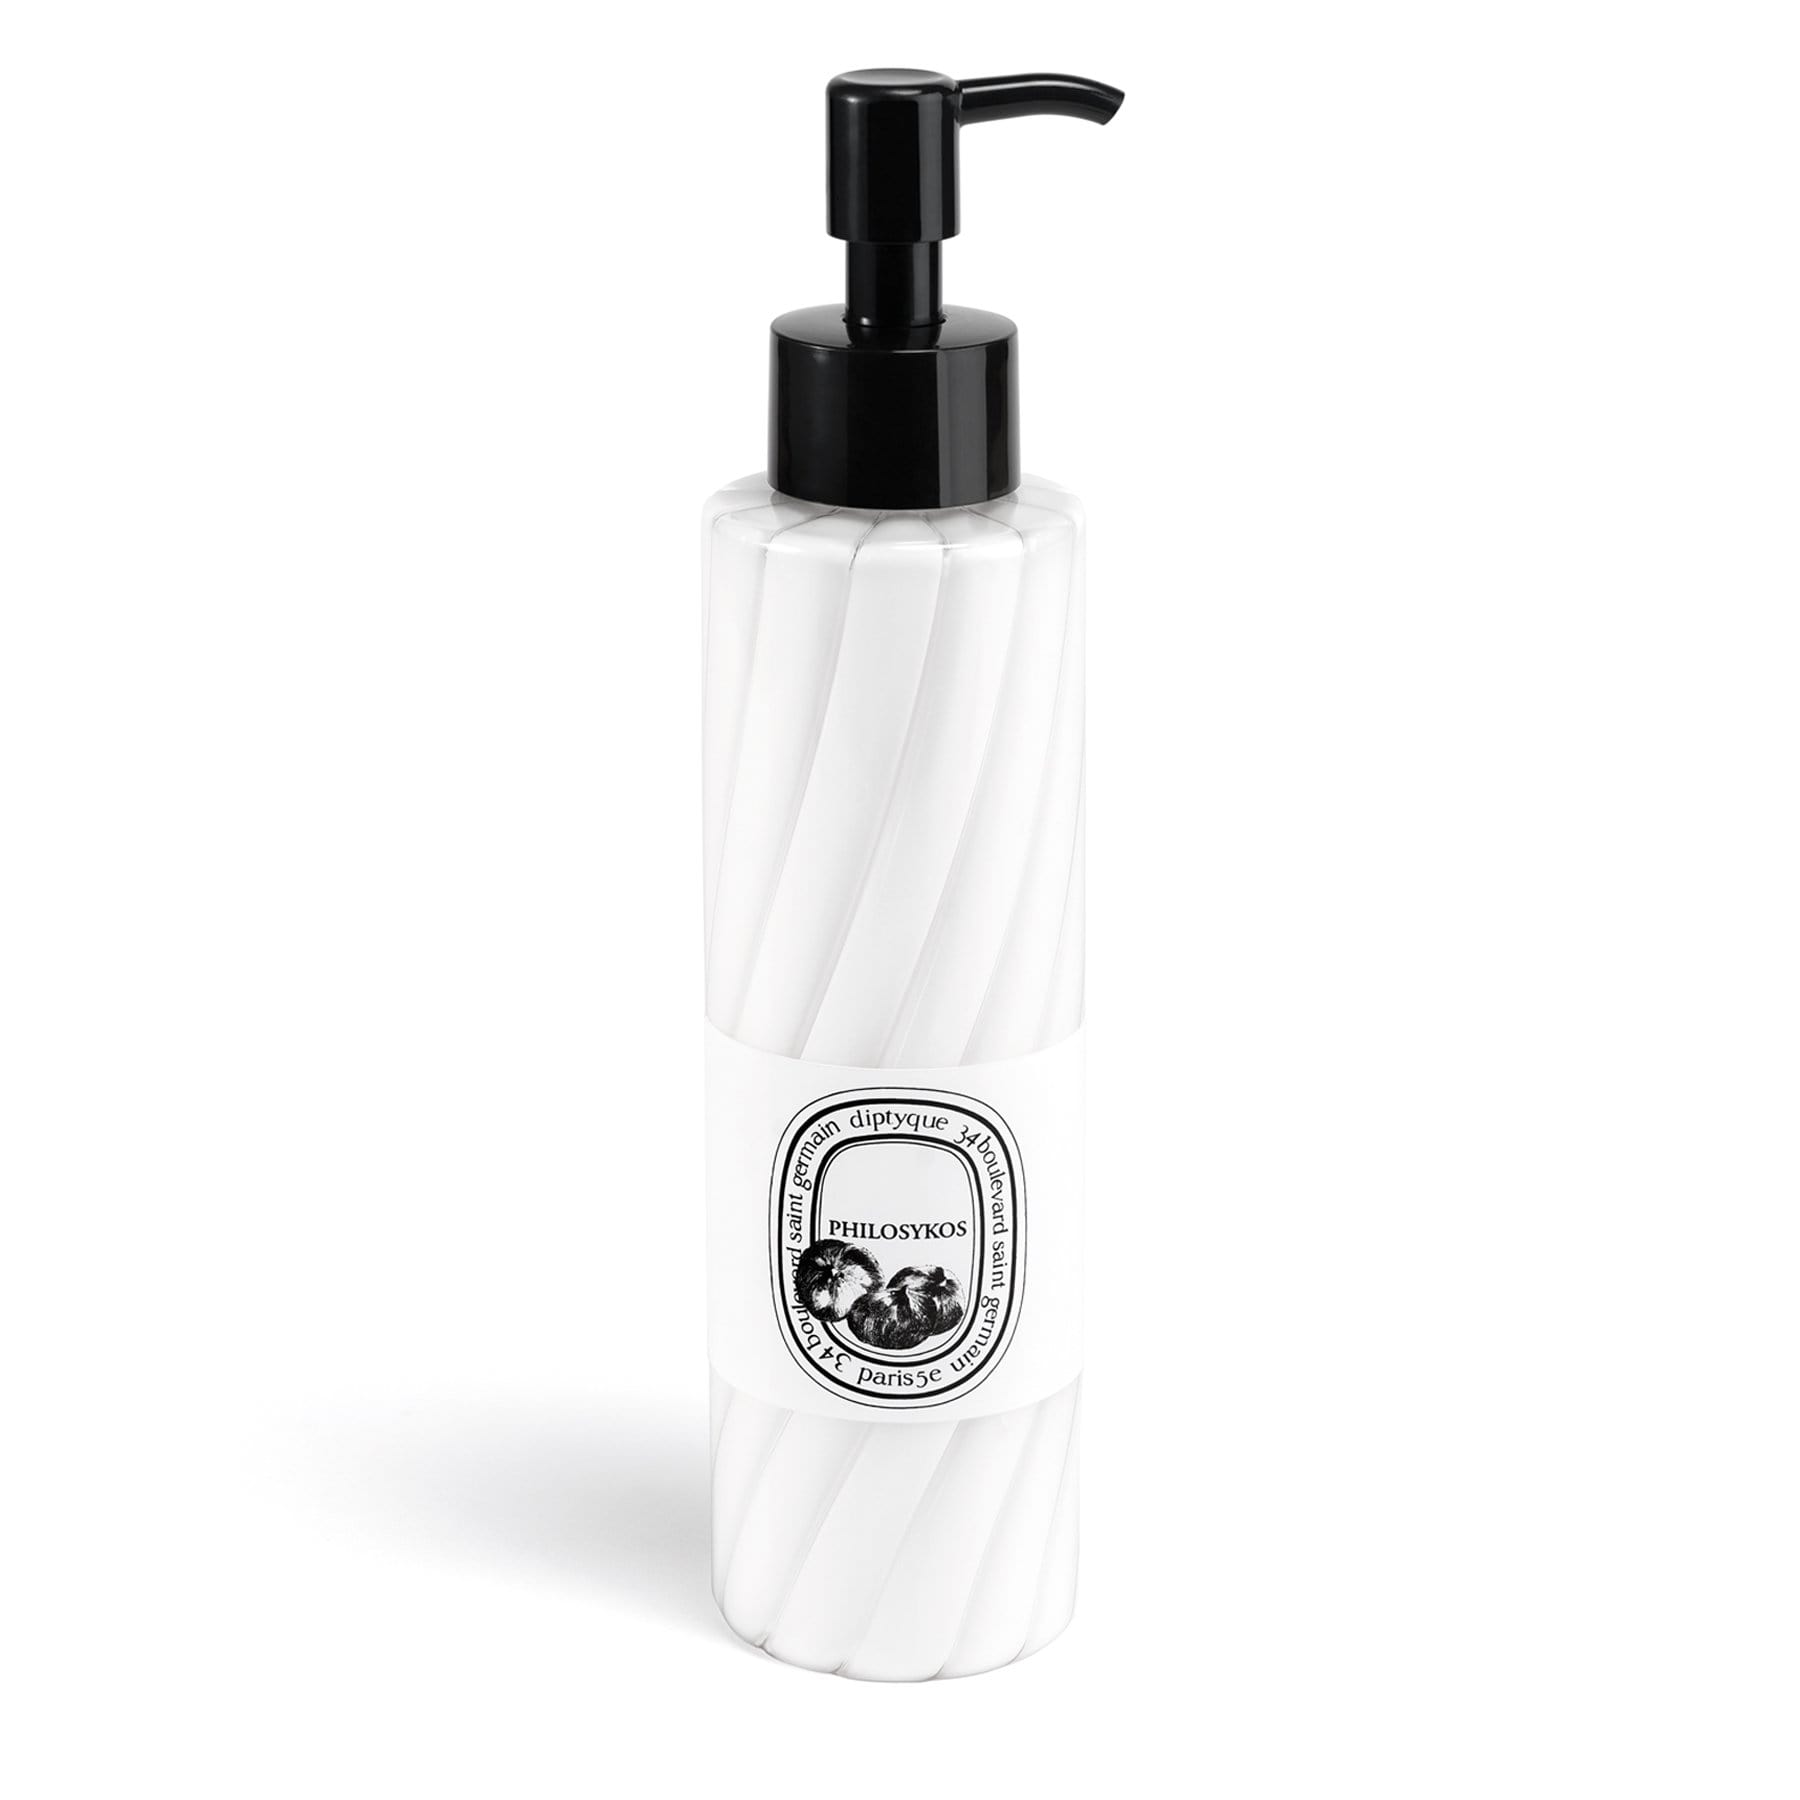 Philosykos Diptyque Hand and Body Lotion